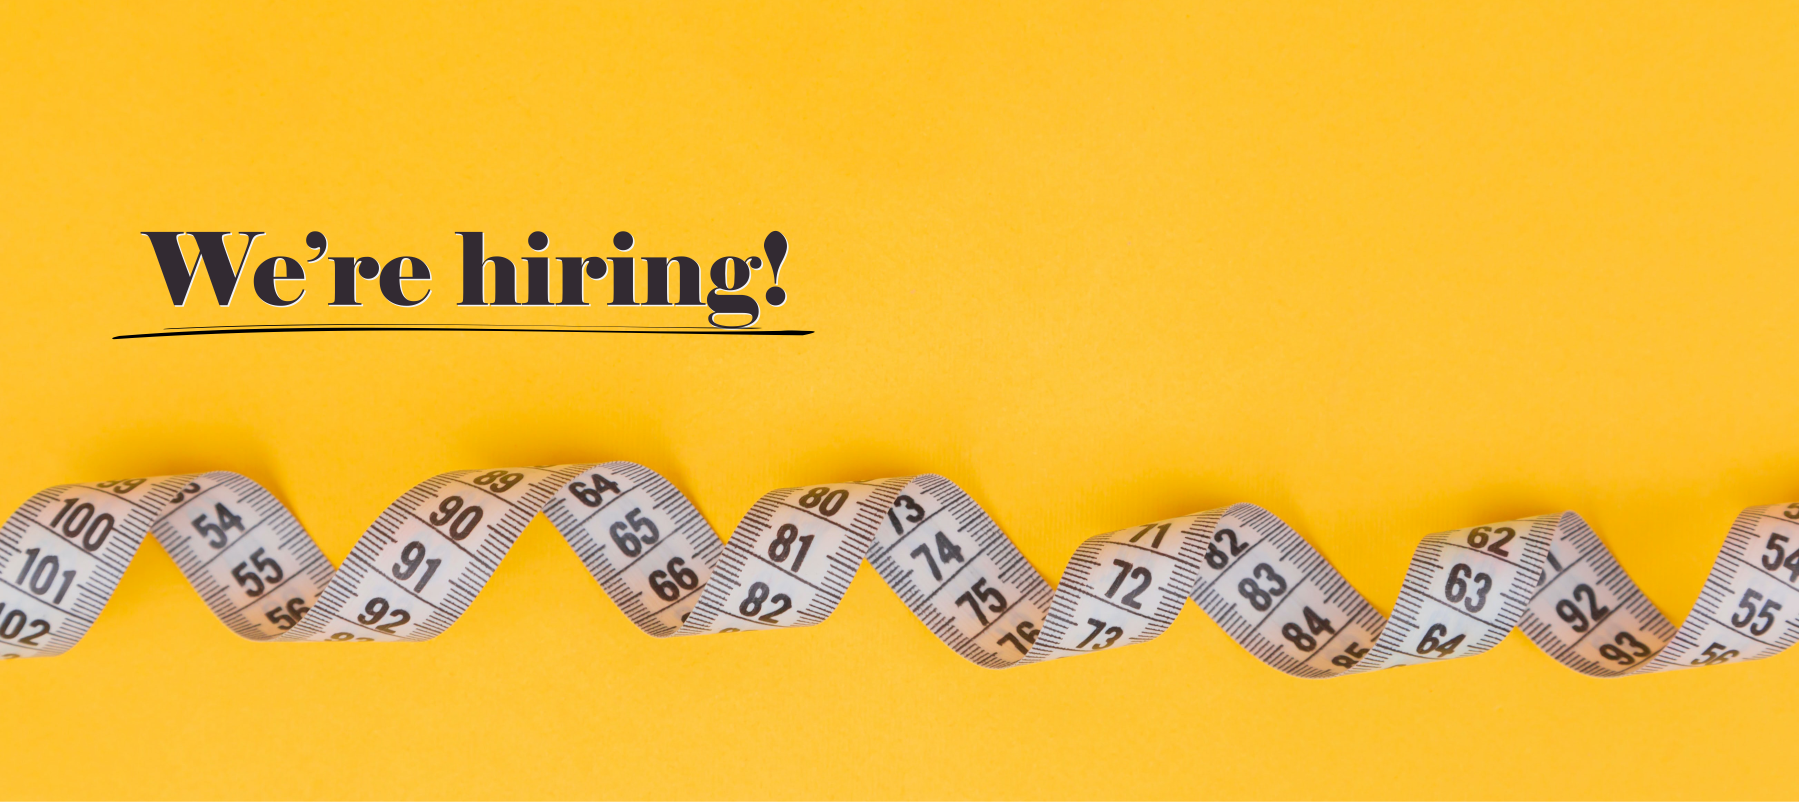 We're hiring a Seamstress/Dressmaker! Join our Team!